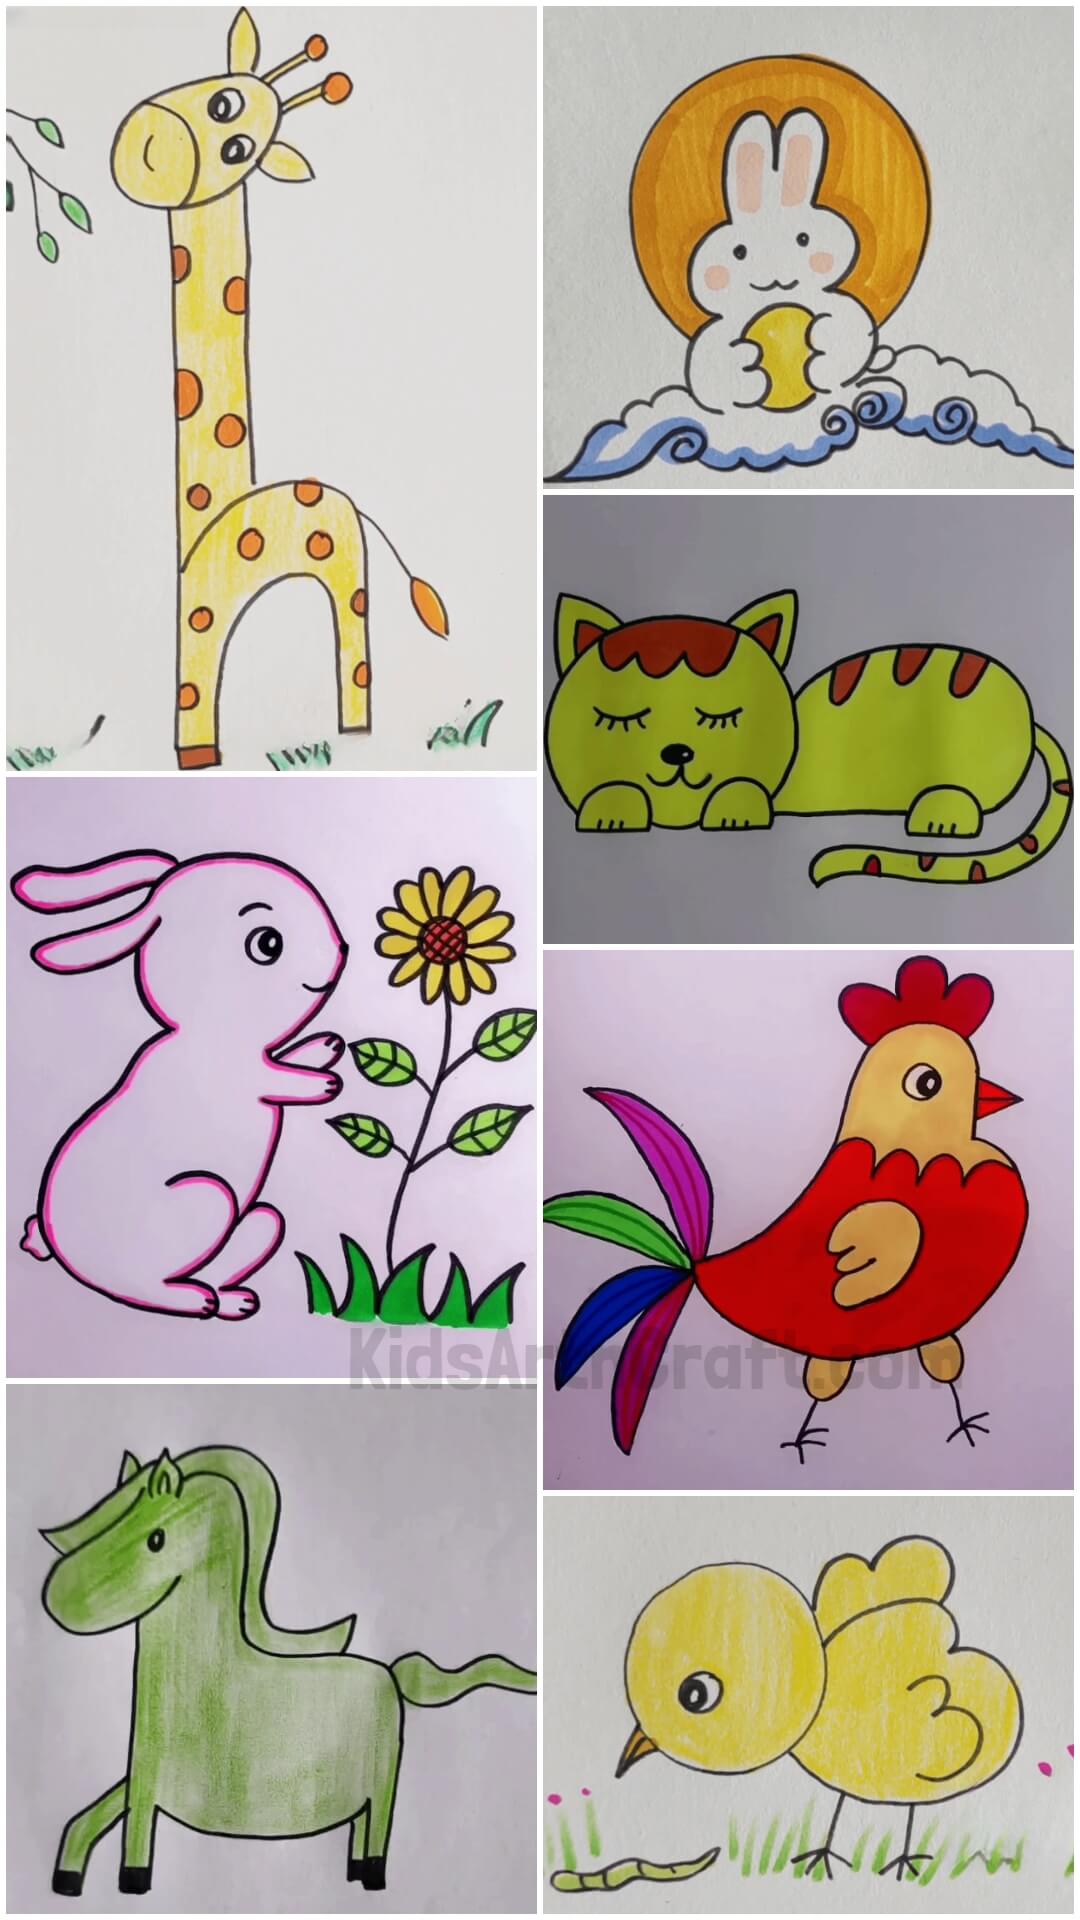 Kid's Drawing: Show Some Love To Animals